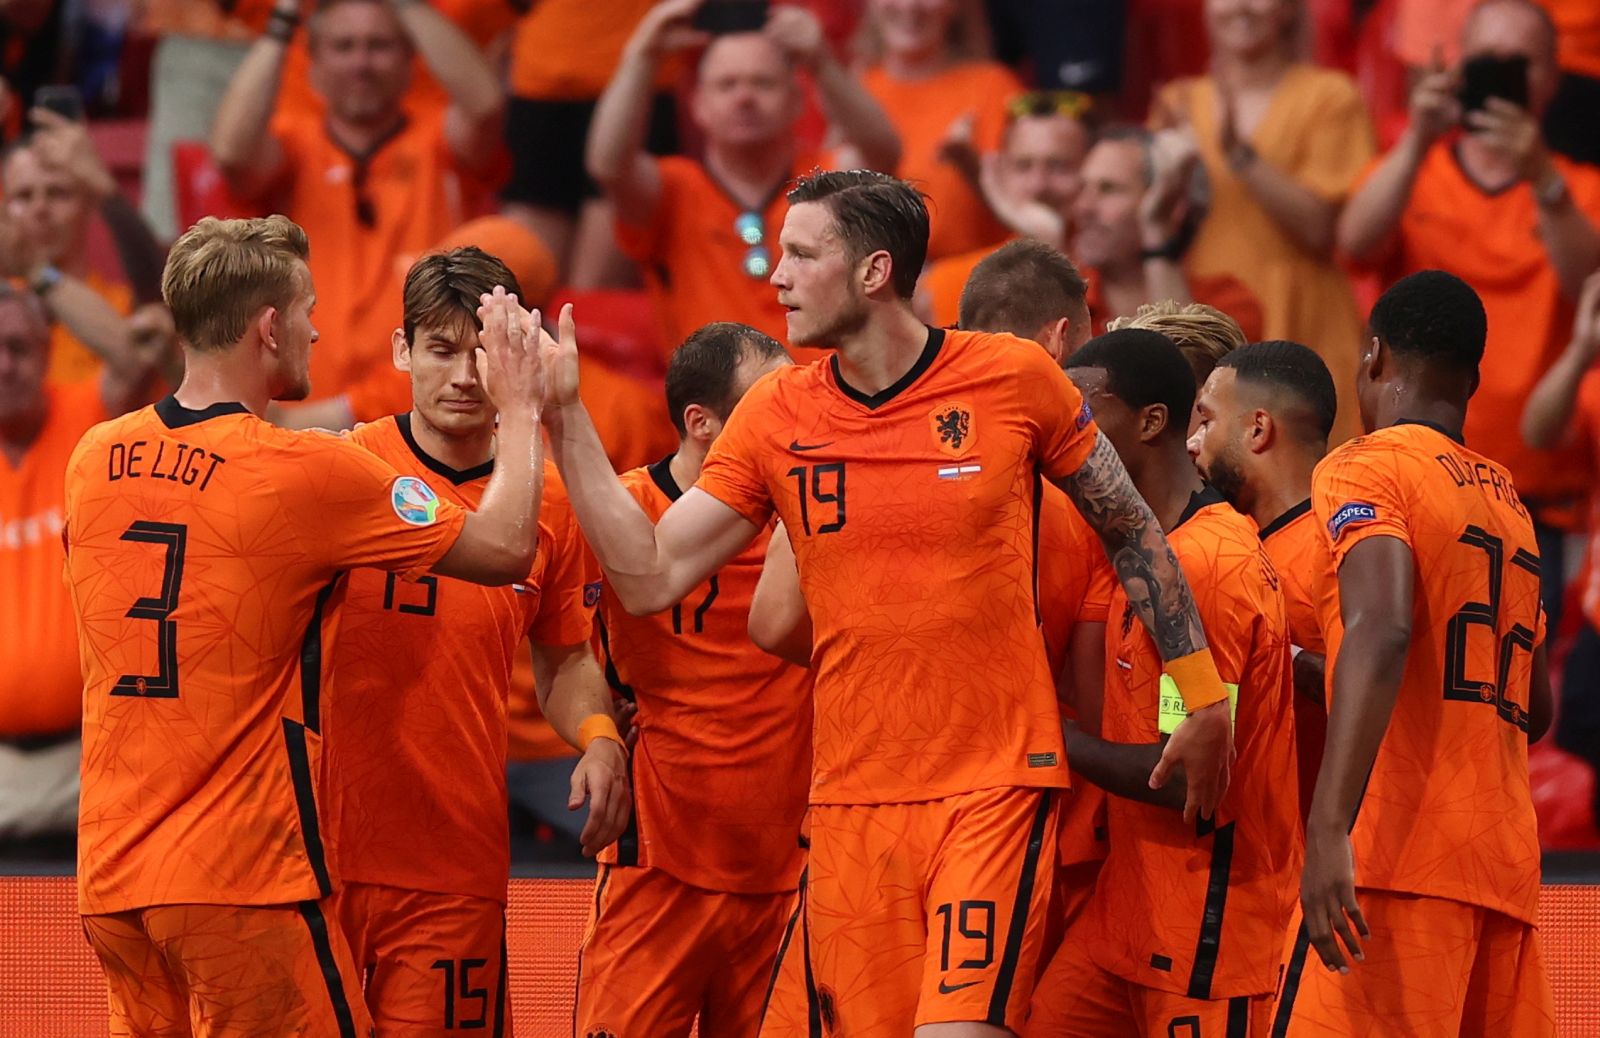 epa09280951 Wout Weghorst (C) of the Netherlands and team-mates celebrate the 1-0 goal during the UEFA EURO 2020 preliminary round group C soccer match between the Netherlands and Austria in Amsterdam, Netherlands, 17 June 2021.  EPA/Dean Mouhtaropoulous / POOL (RESTRICTIONS: For editorial news reporting purposes only. Images must appear as still images and must not emulate match action video footage. Photographs published in online publications shall have an interval of at least 20 seconds between the posting.)